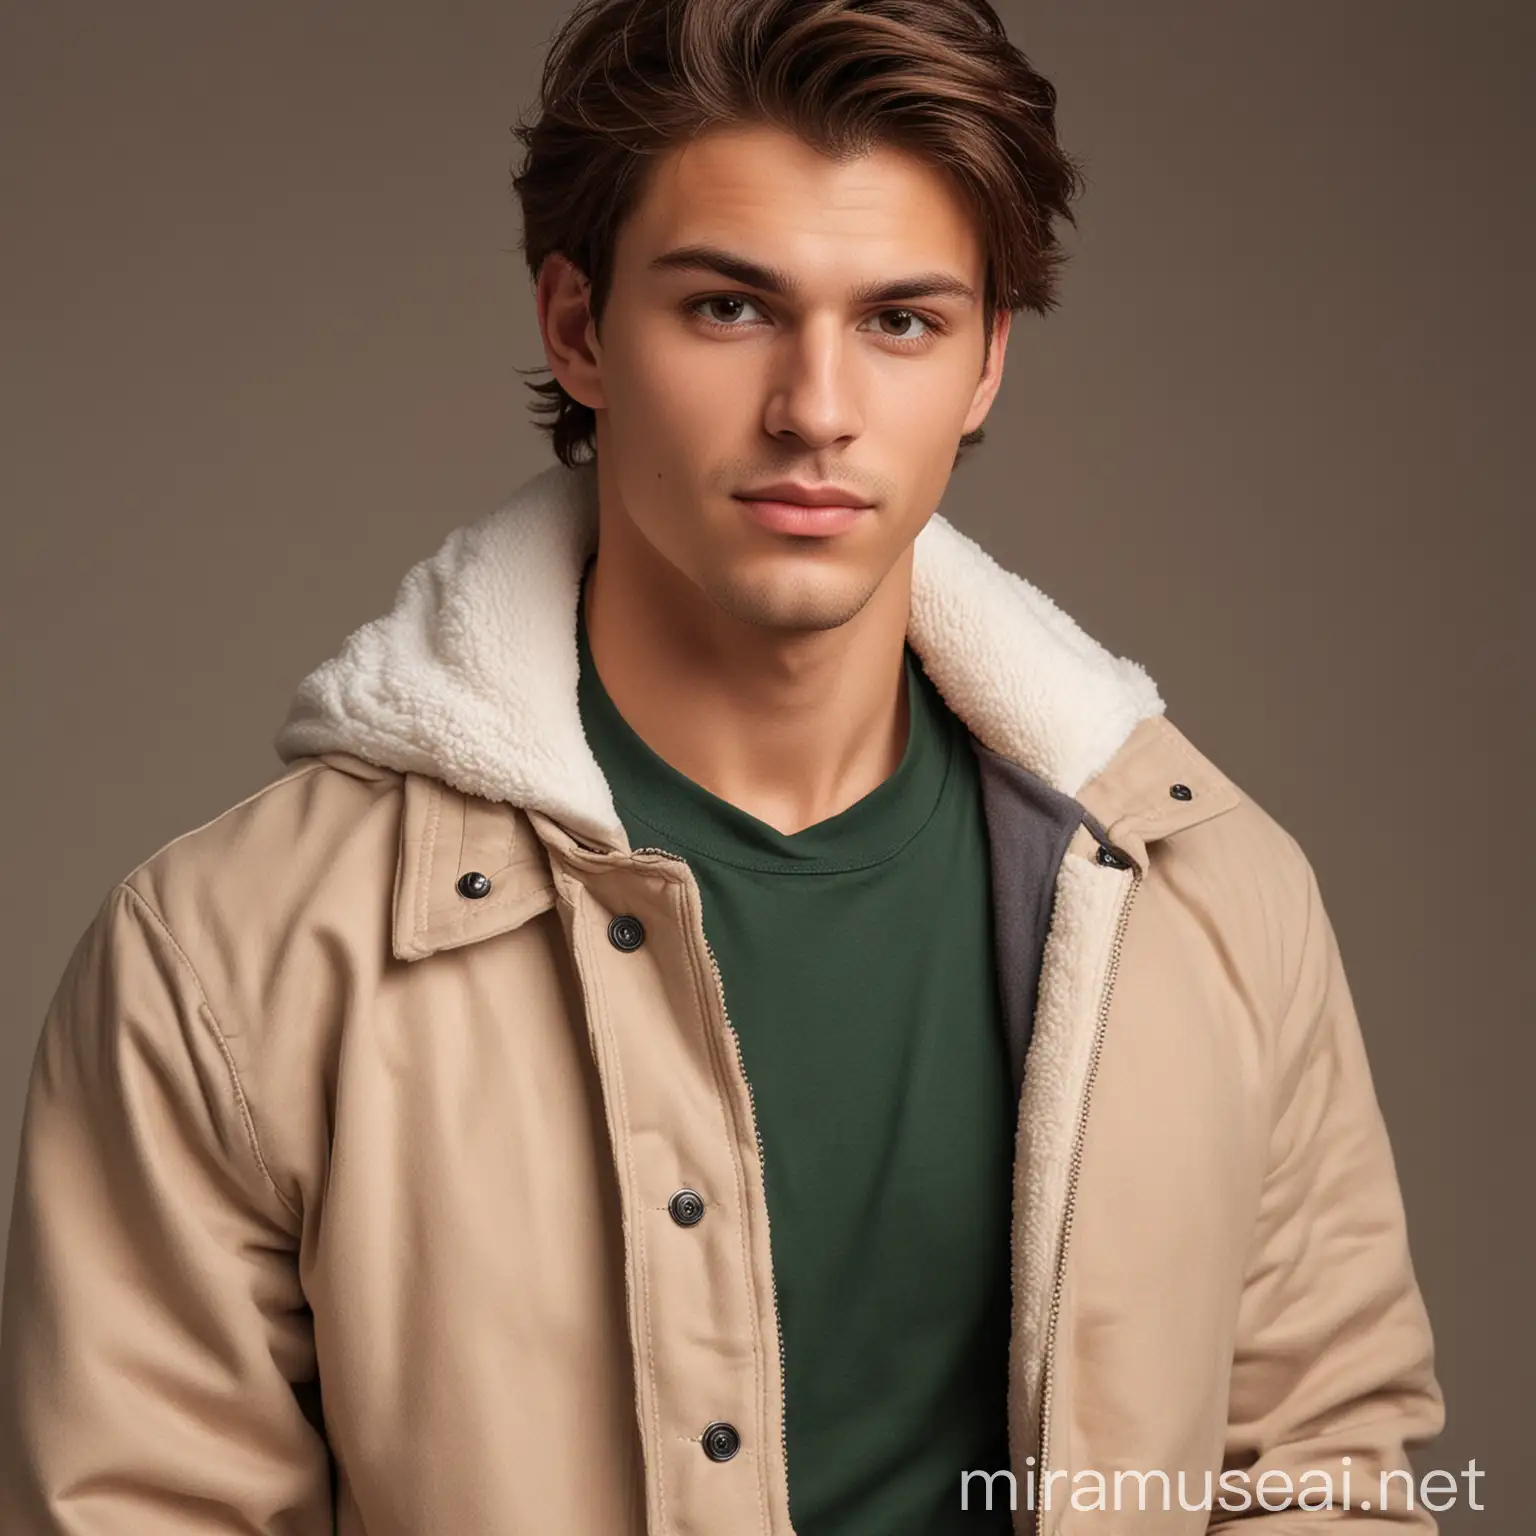 Stylish Mid20s Man in Light Varsity Jacket with Toned Physique